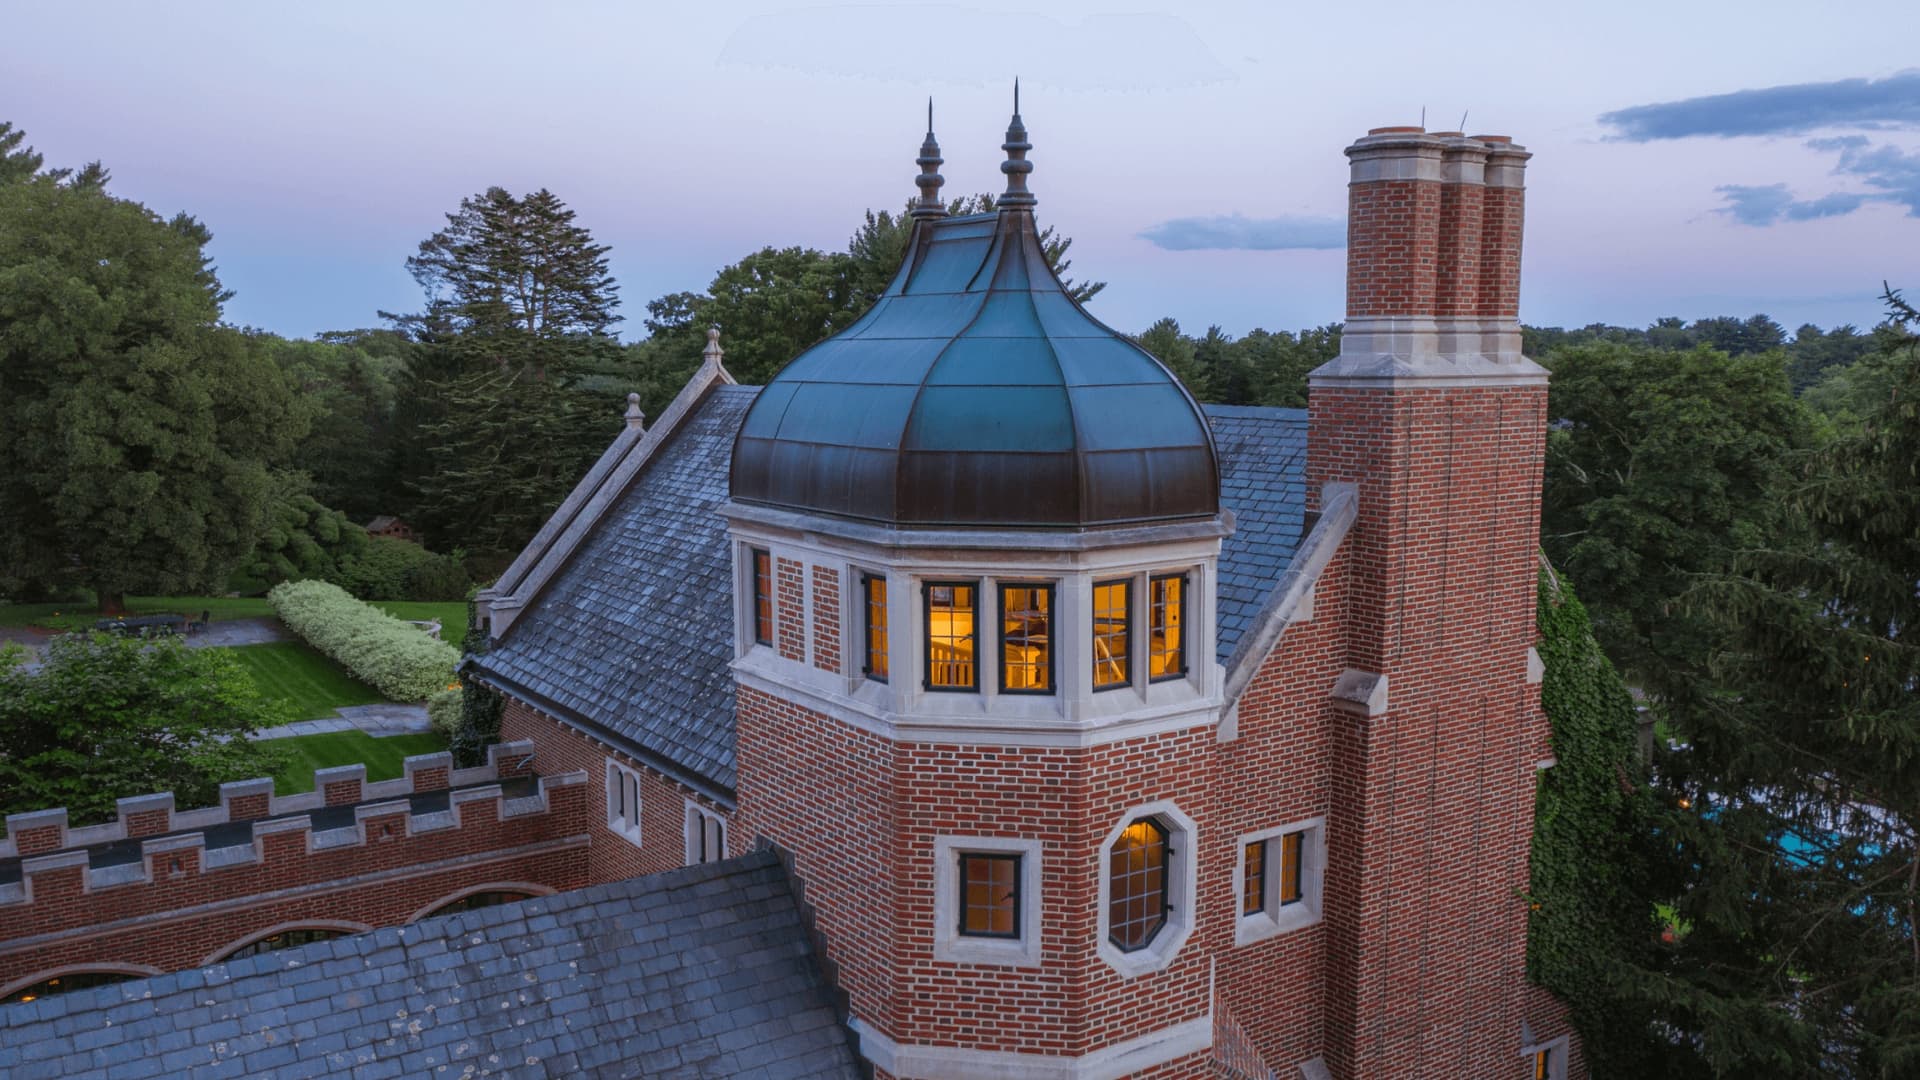 A circular staircase leads to the top of the home's windowed turret.